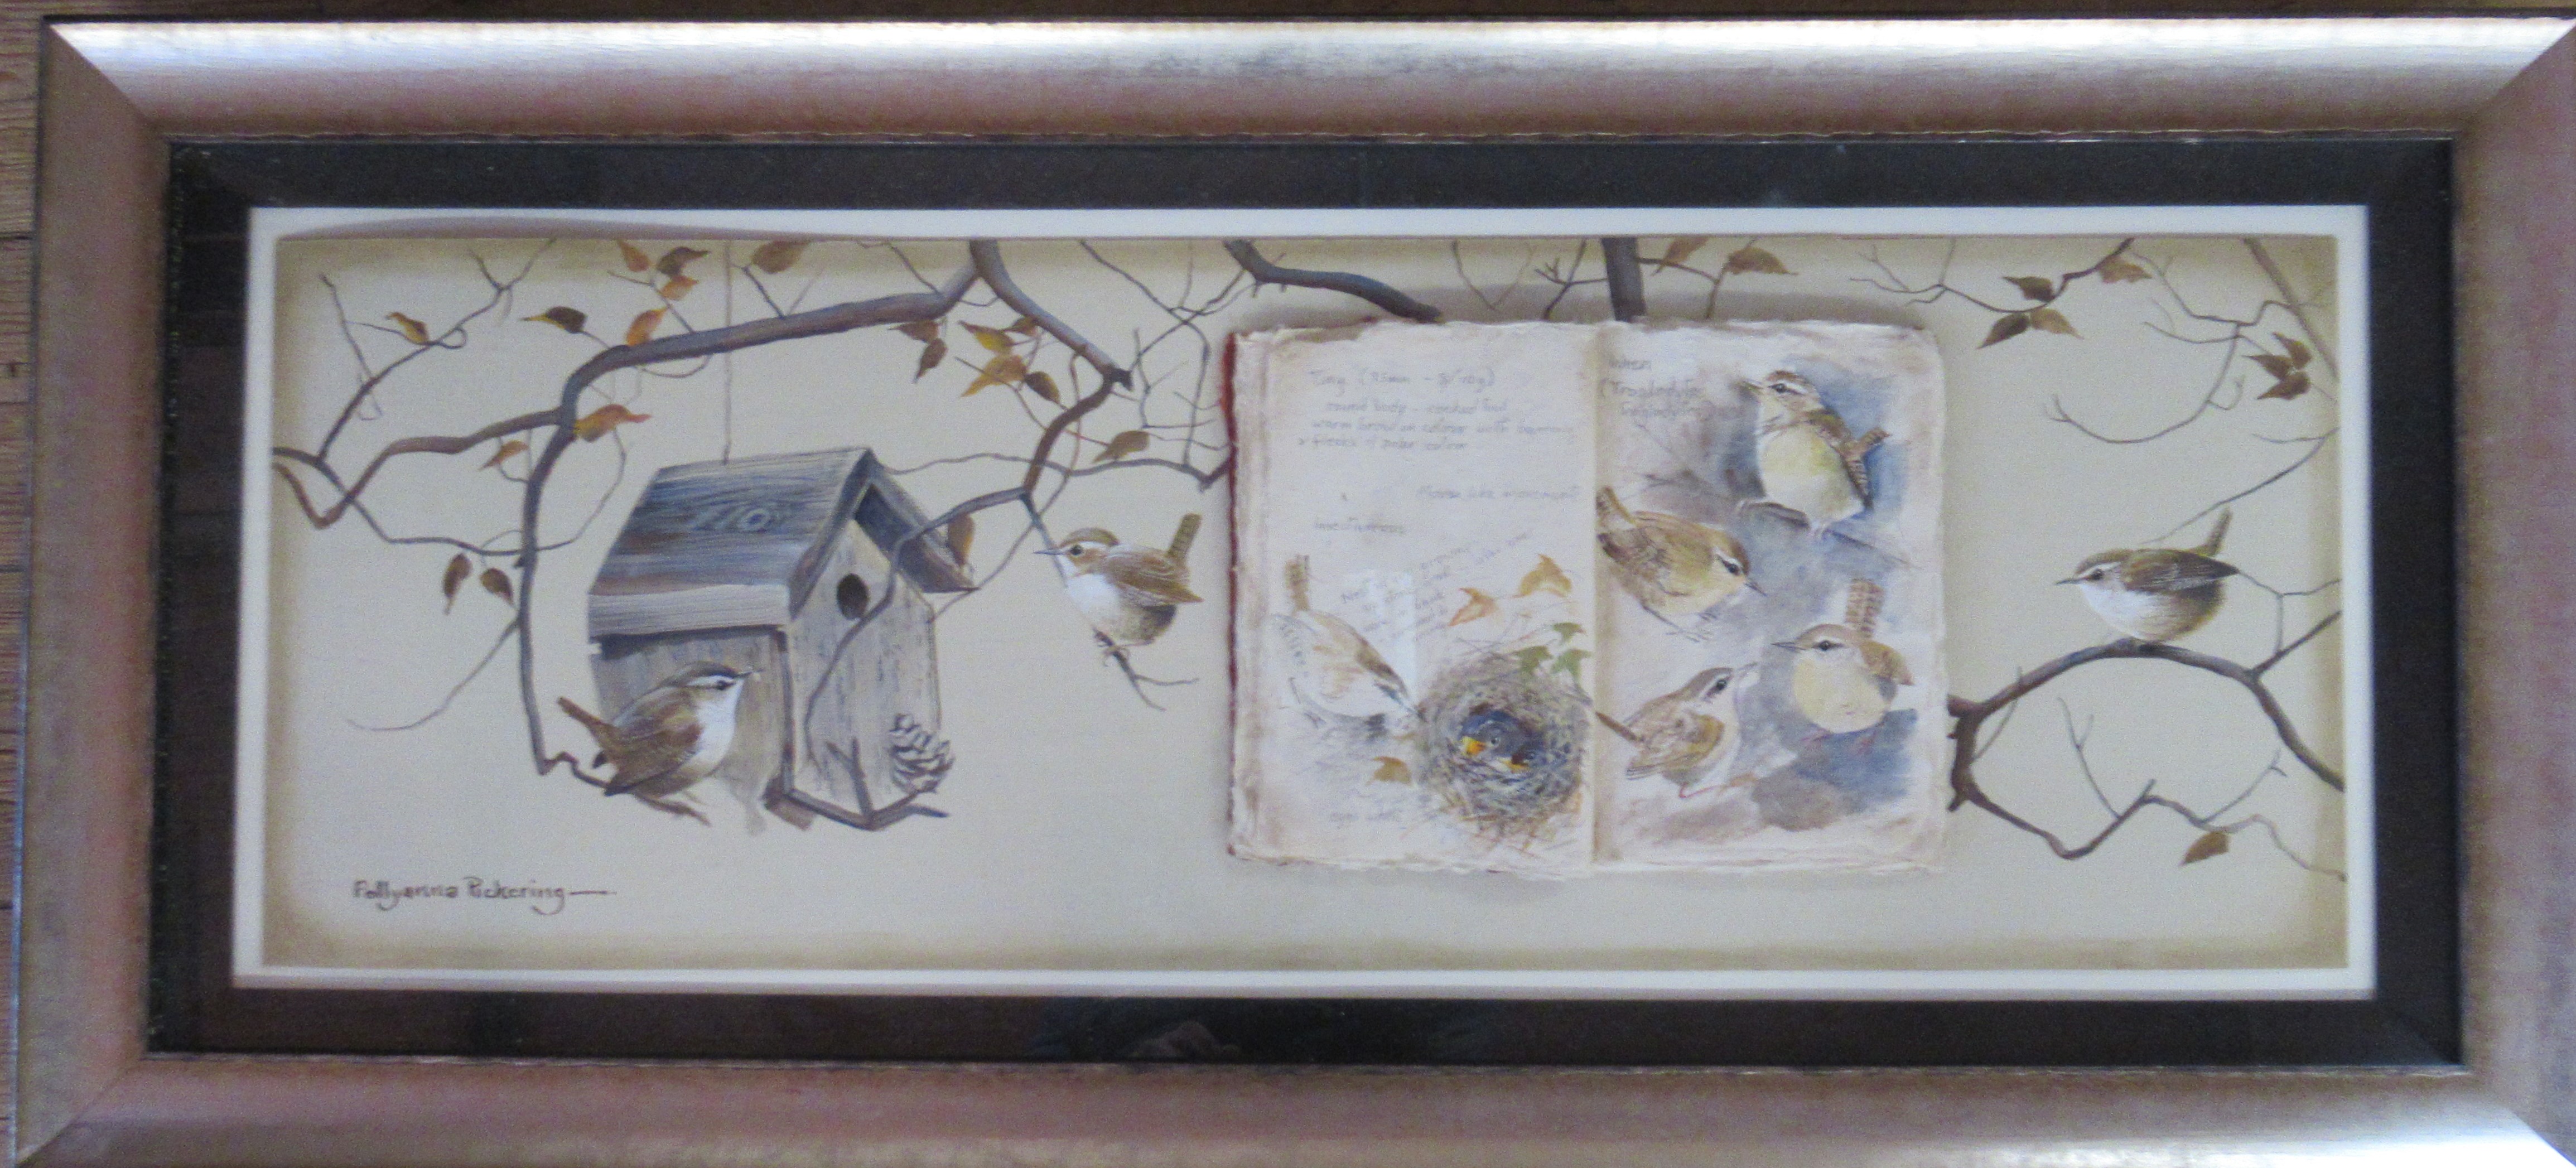 Pollyanna Pickering, watercolour, studies of wren with framed sketch book, 12ins x 33ins